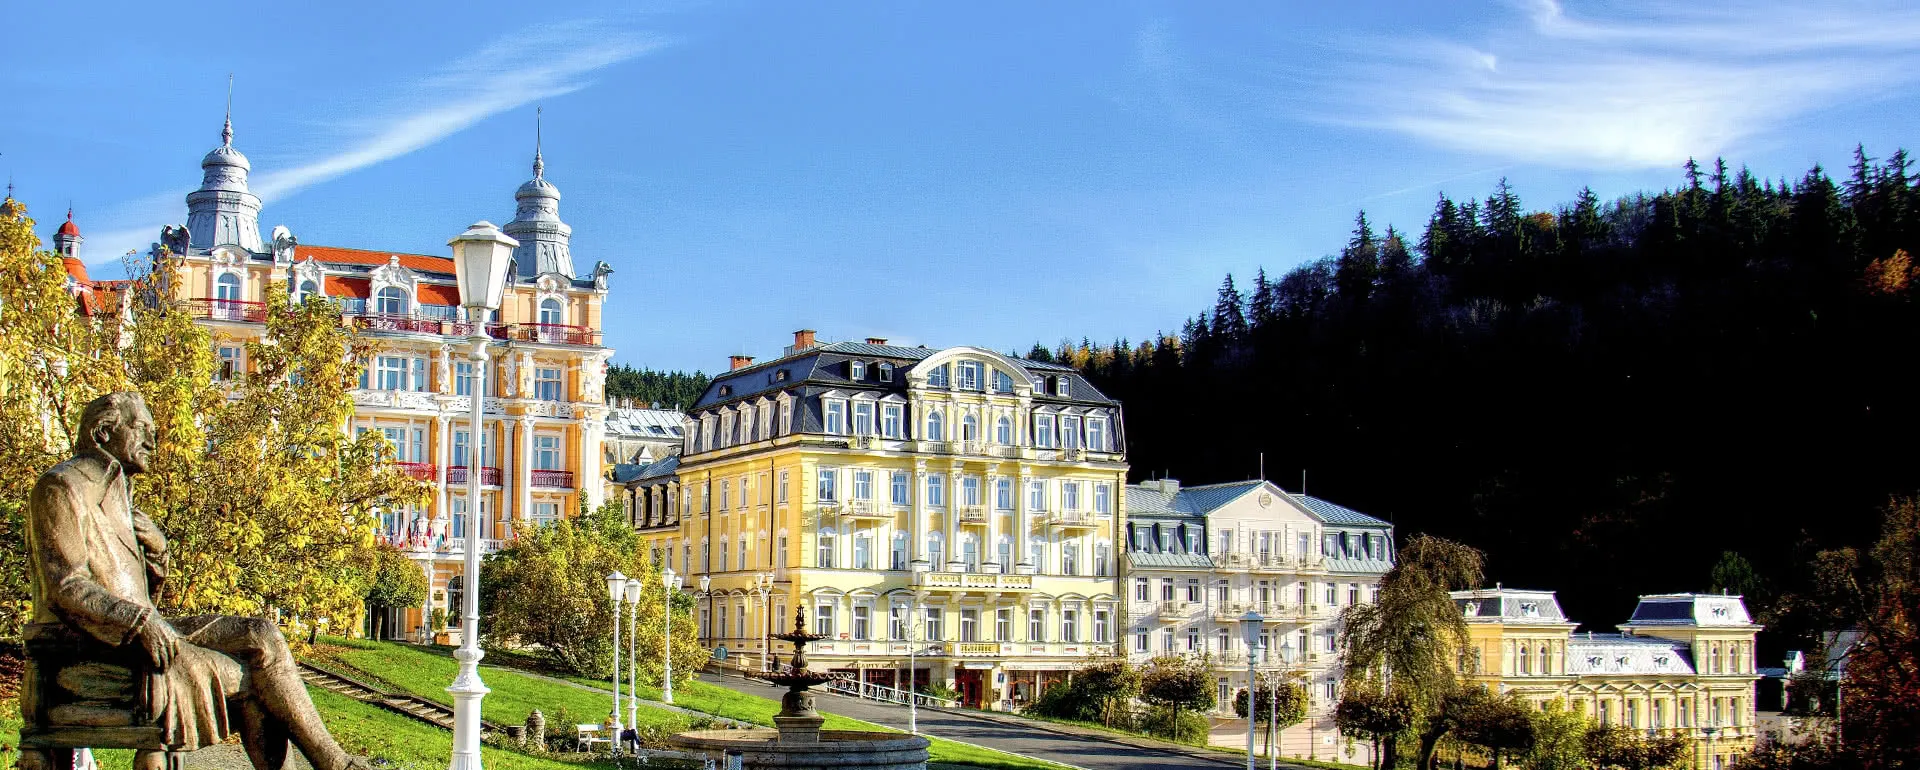 Marienbad - the destination with youth hostels